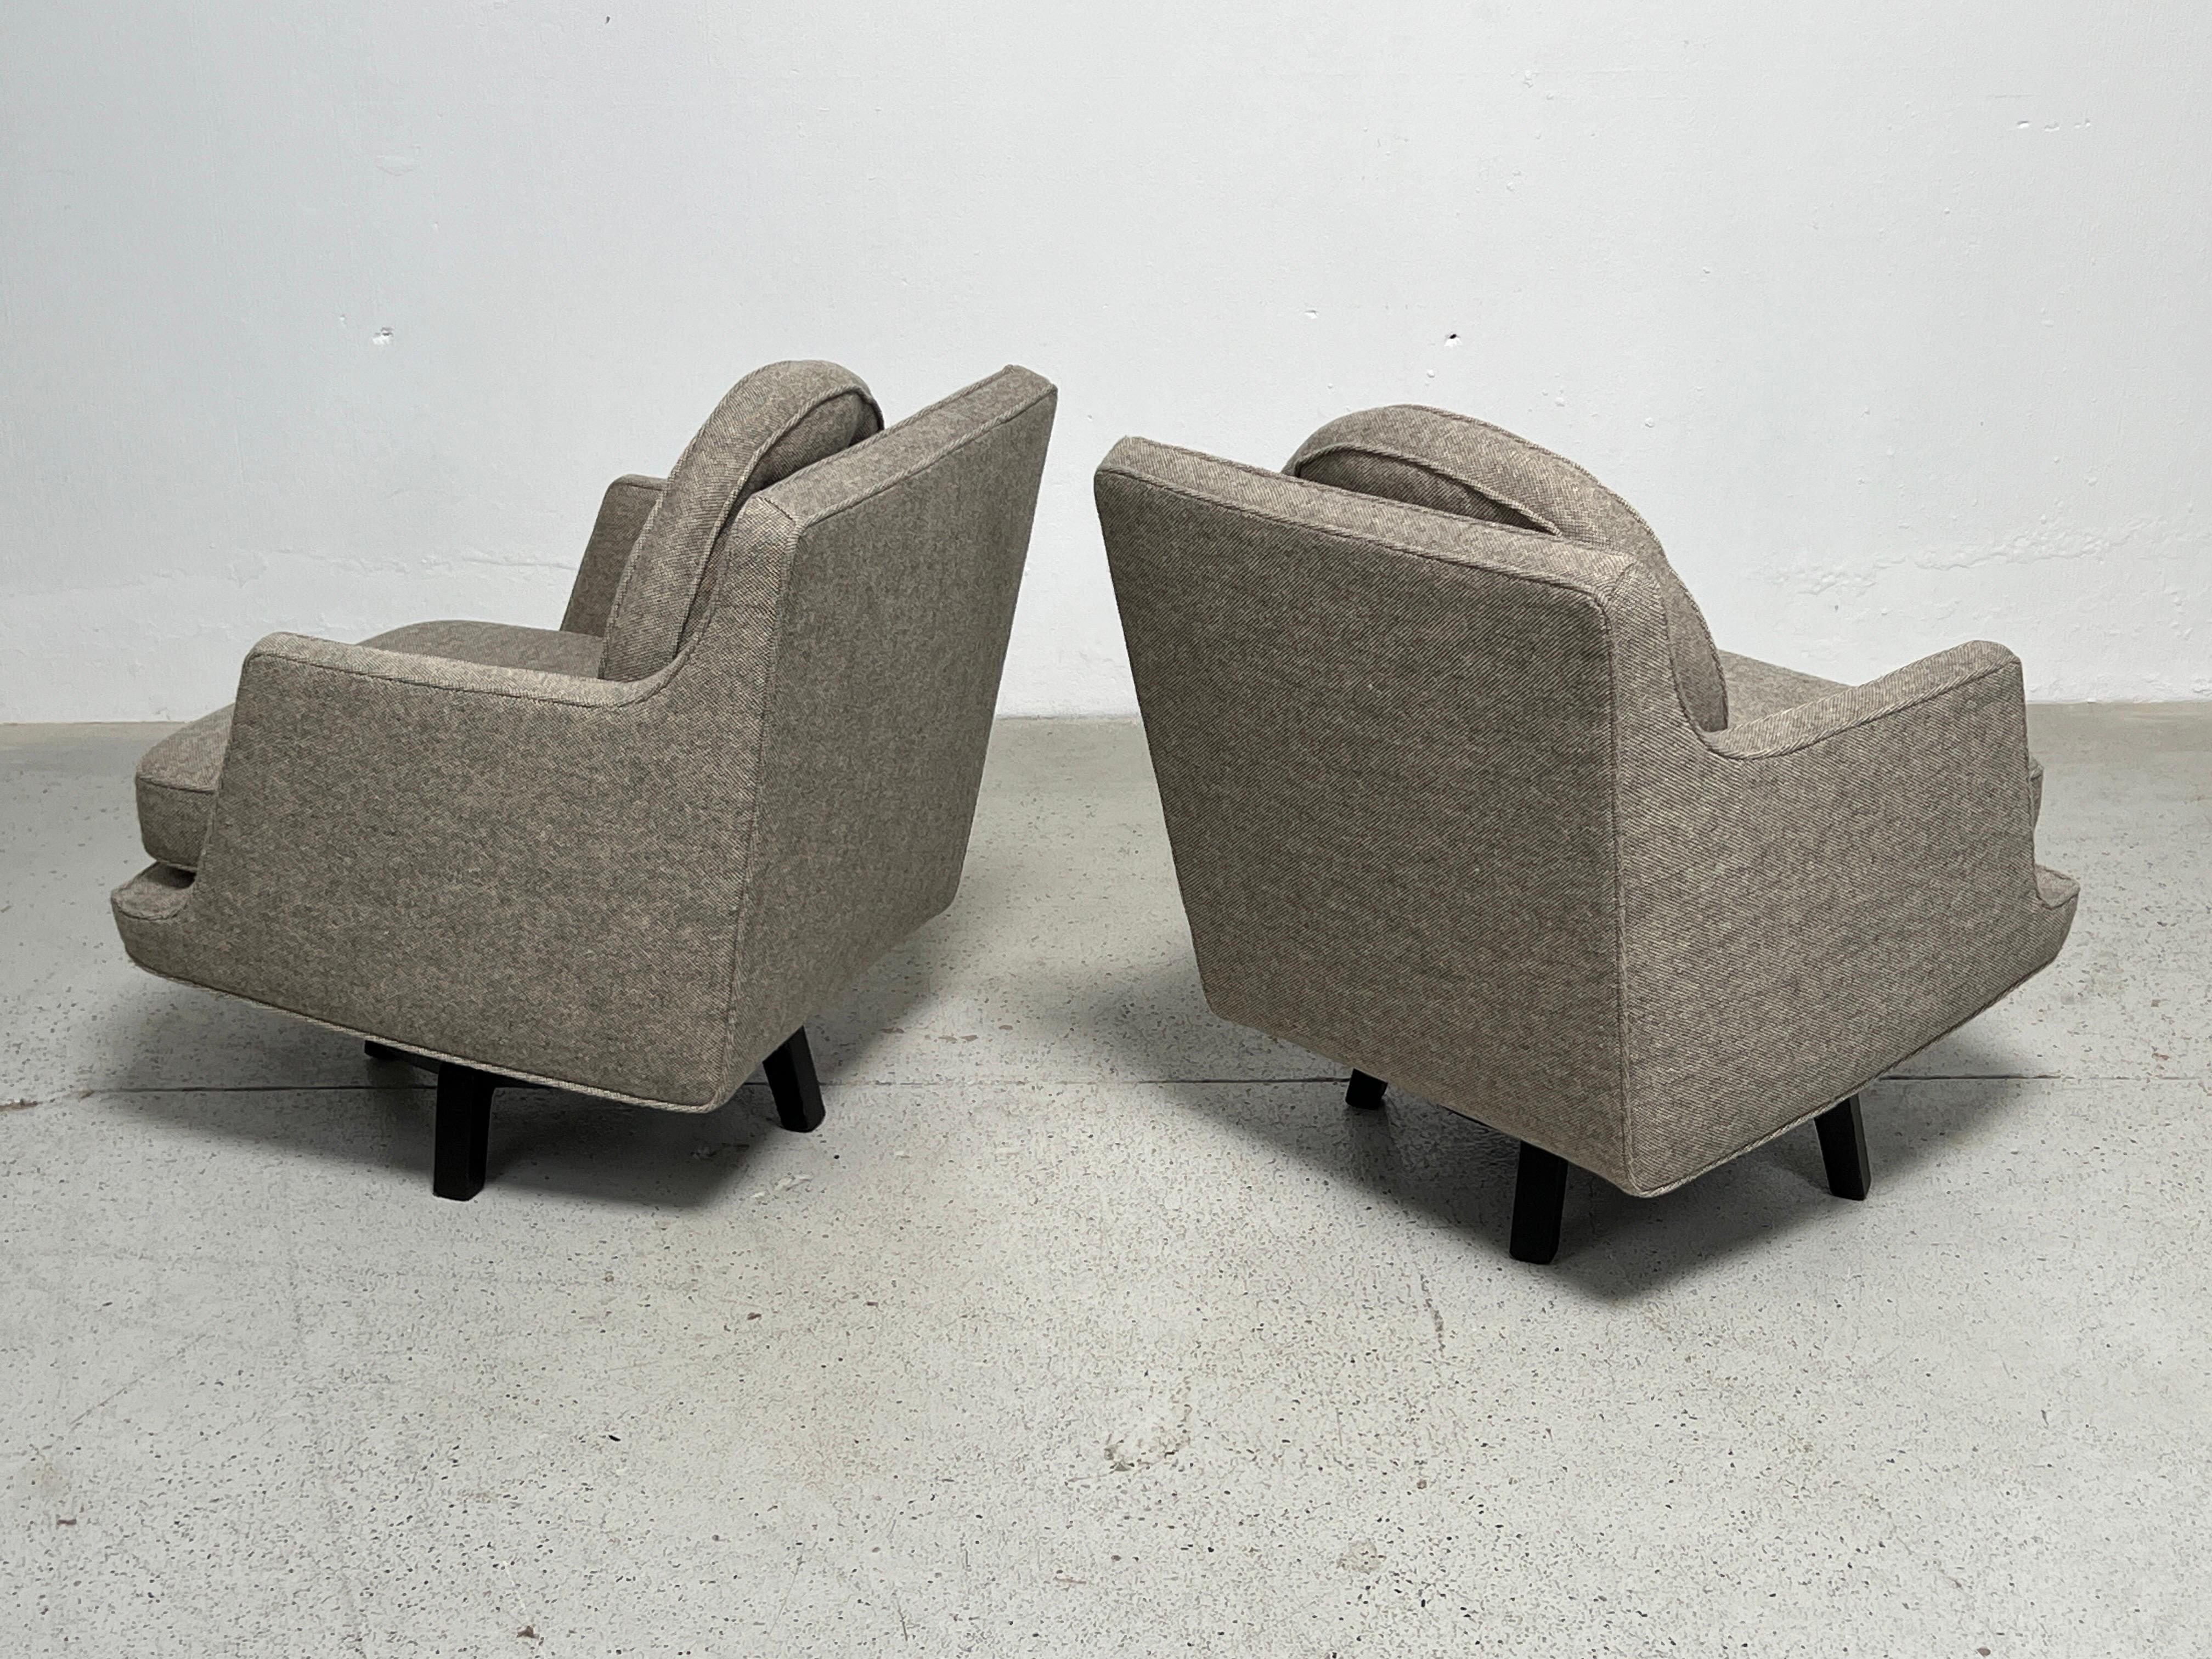 Mid-20th Century Pair of Swivel Chairs by Edward Wormley for Dunbar